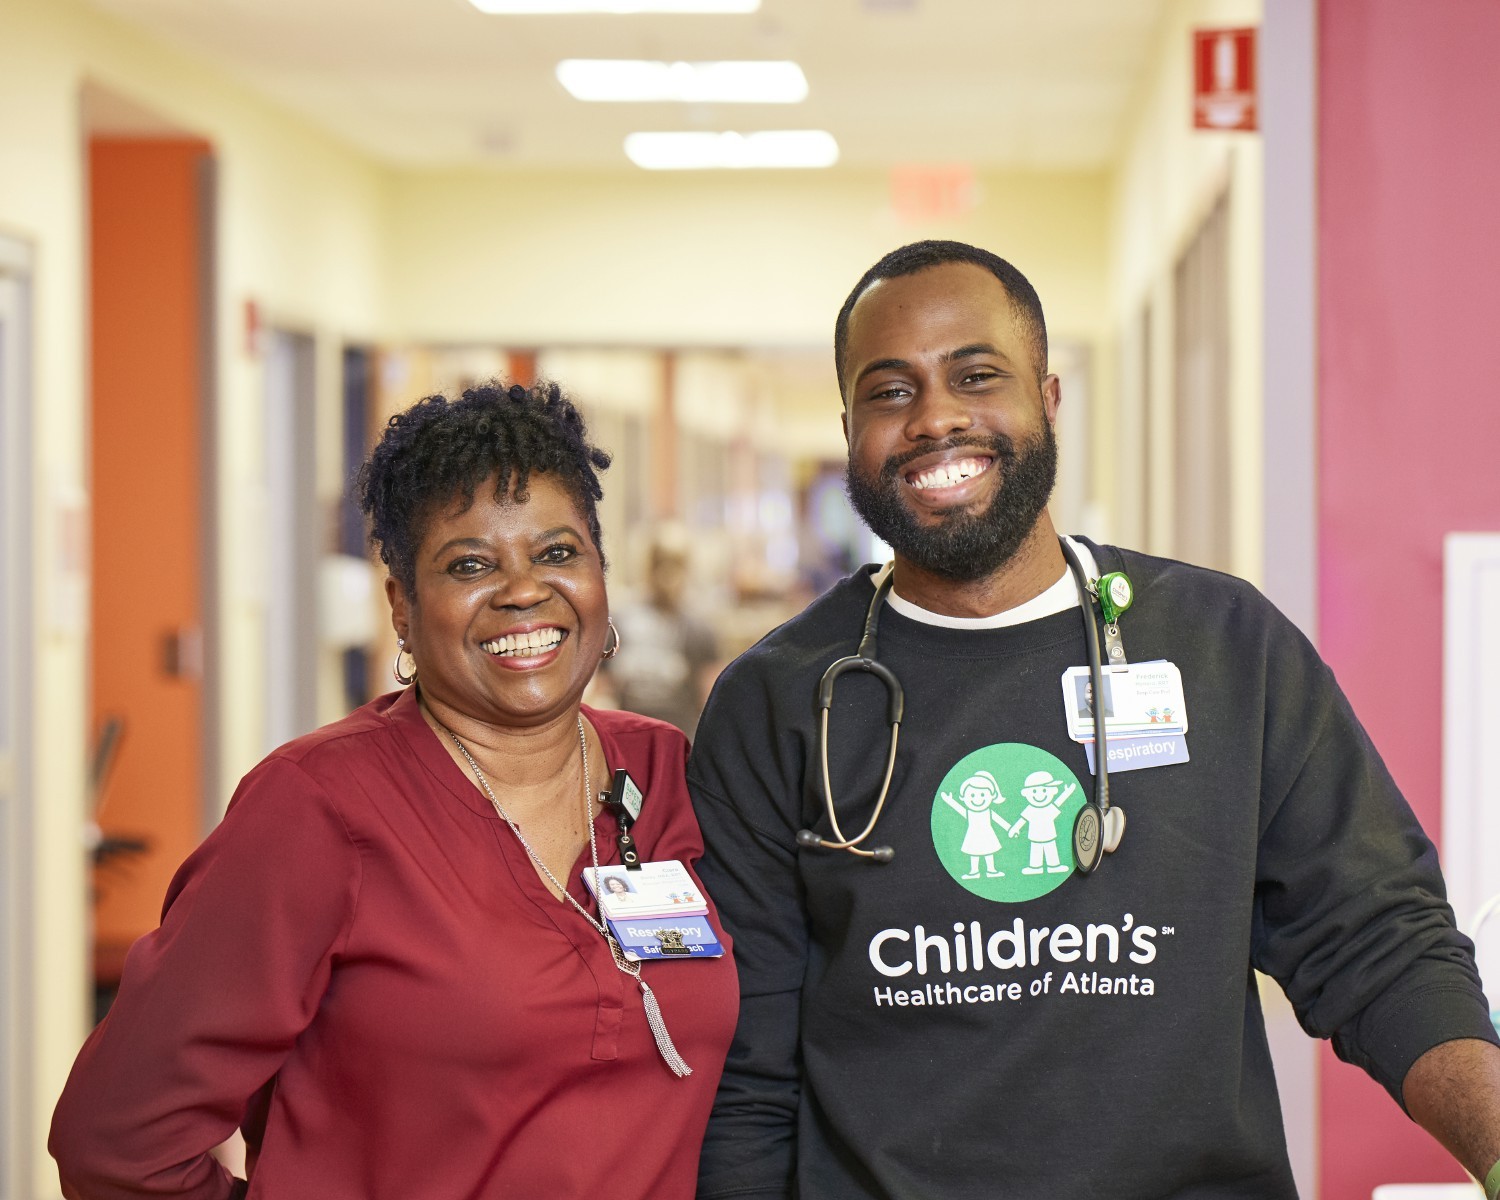 We give patients the chance to grow up and chase their dreams—which, for some, means pursuing a career at Children's.